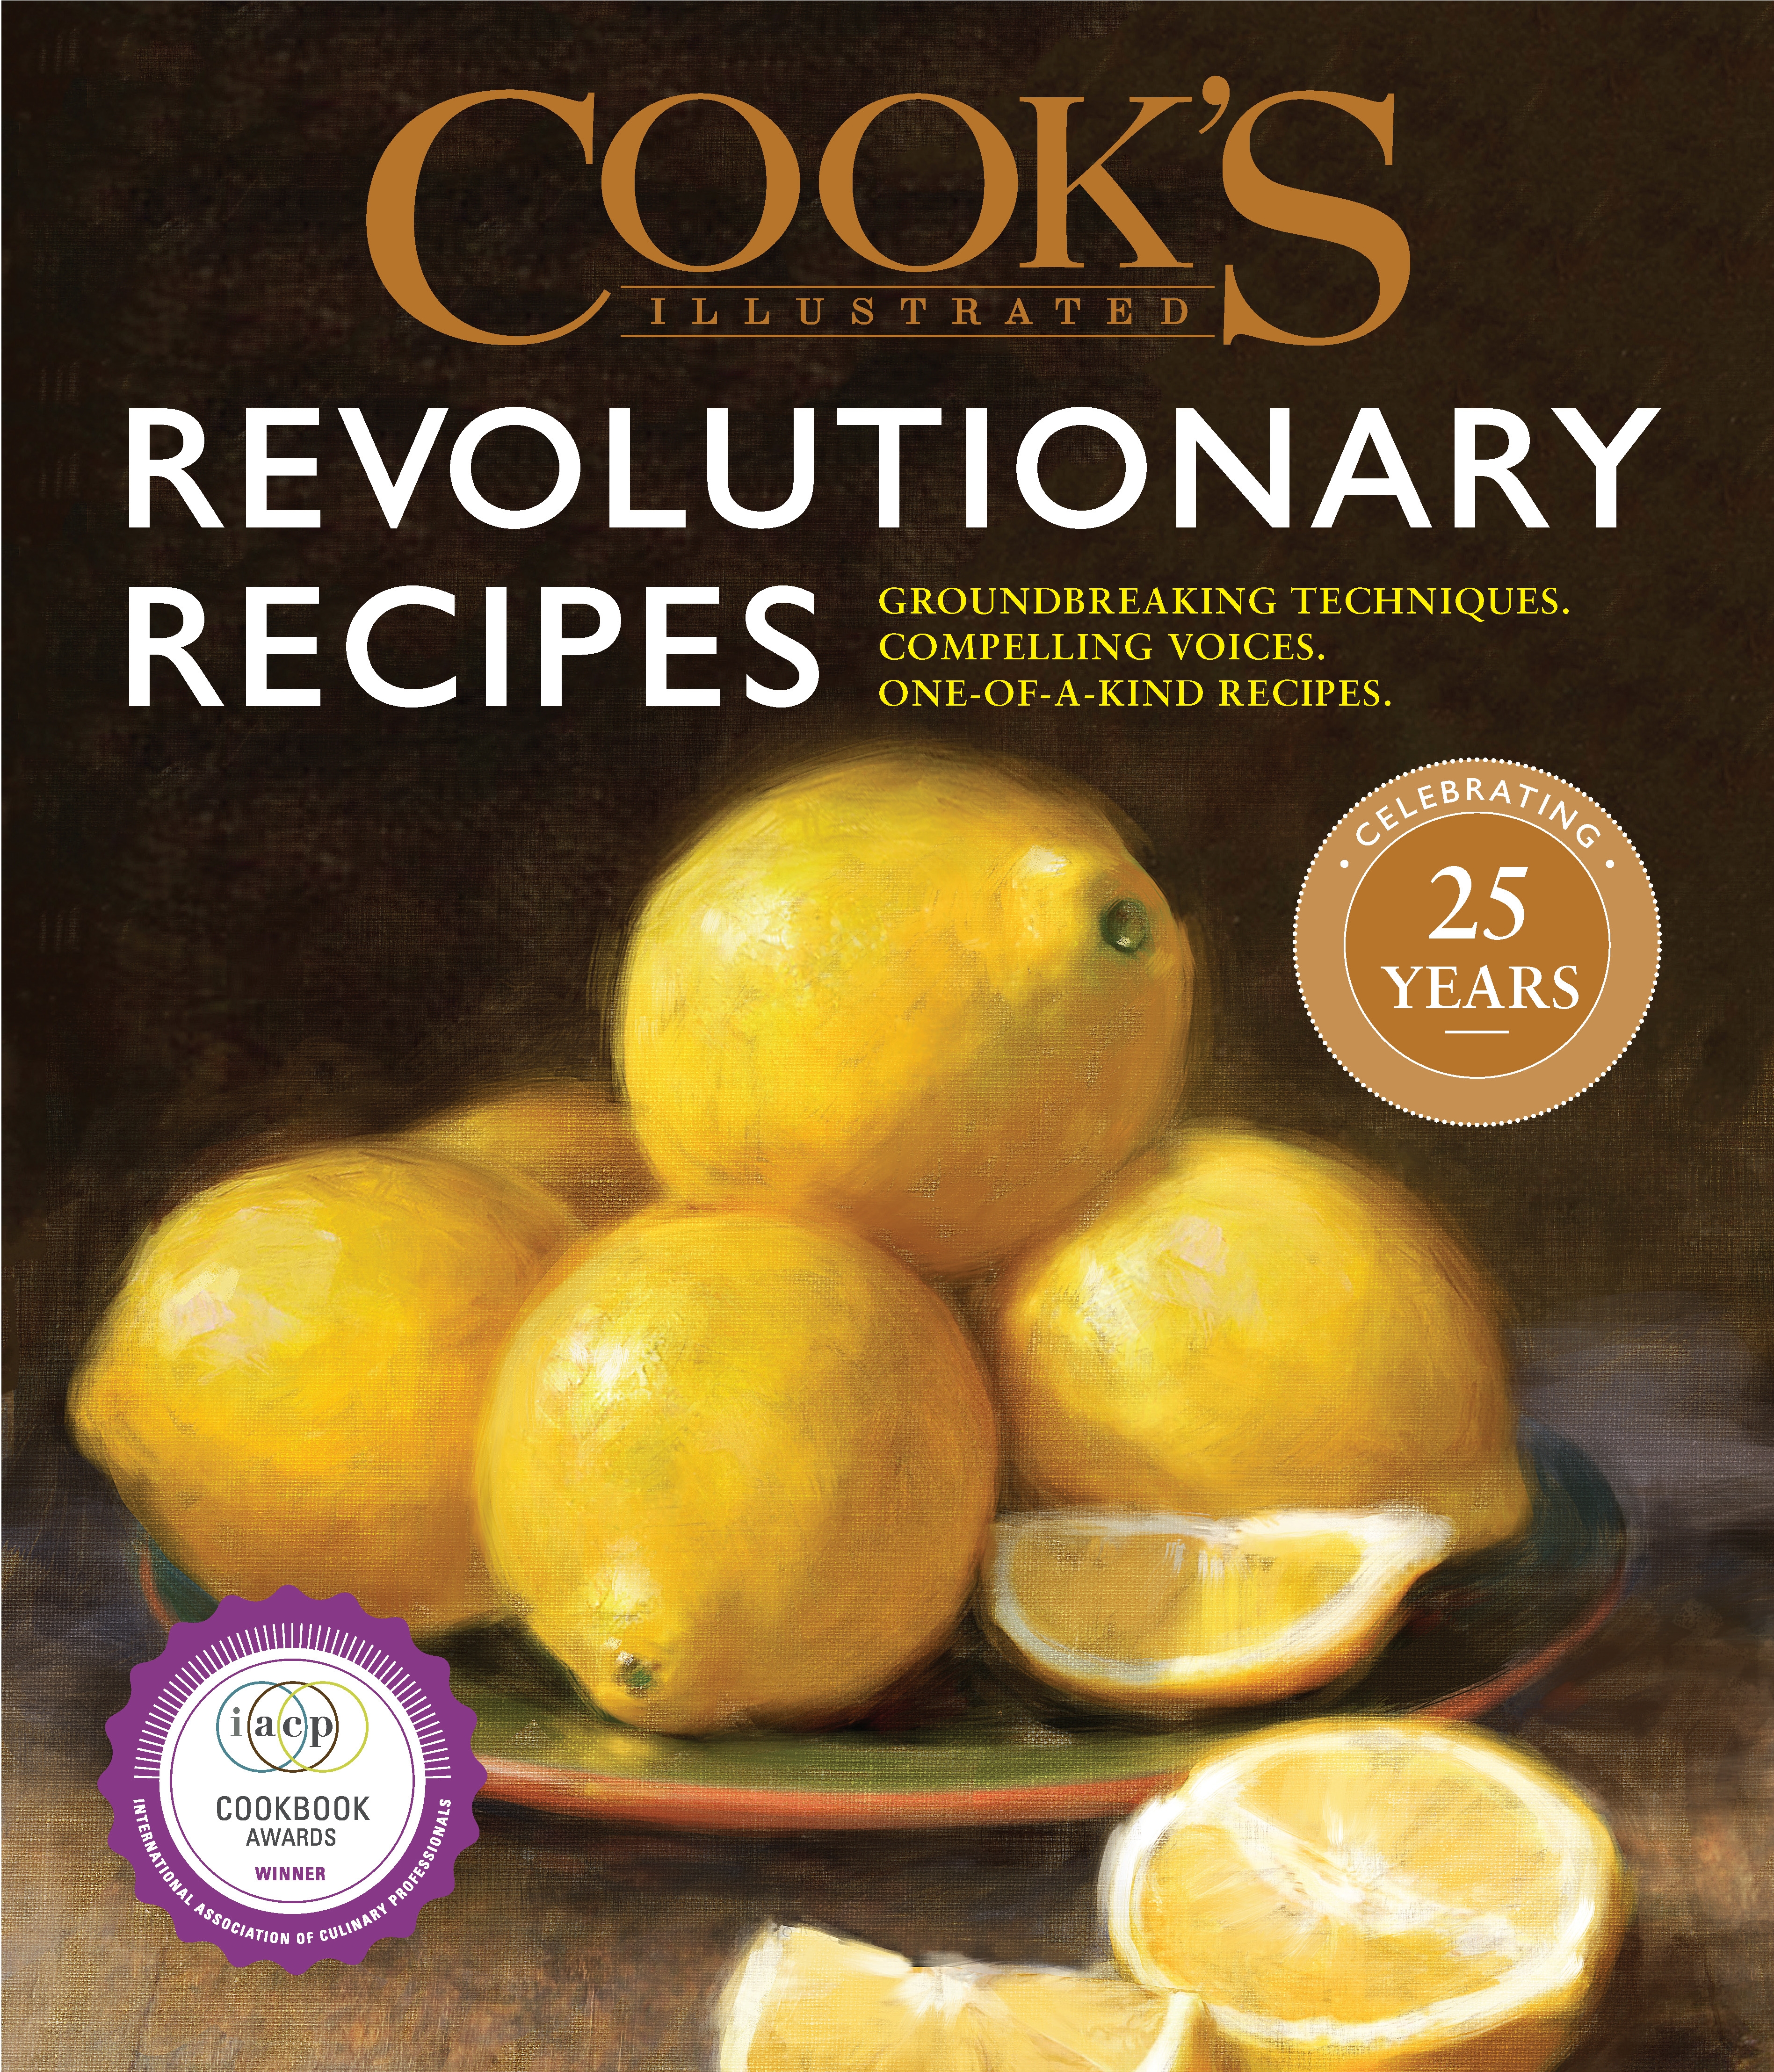 Cook's Illustrated Revolutionary Recipes by America's Test Kitchen